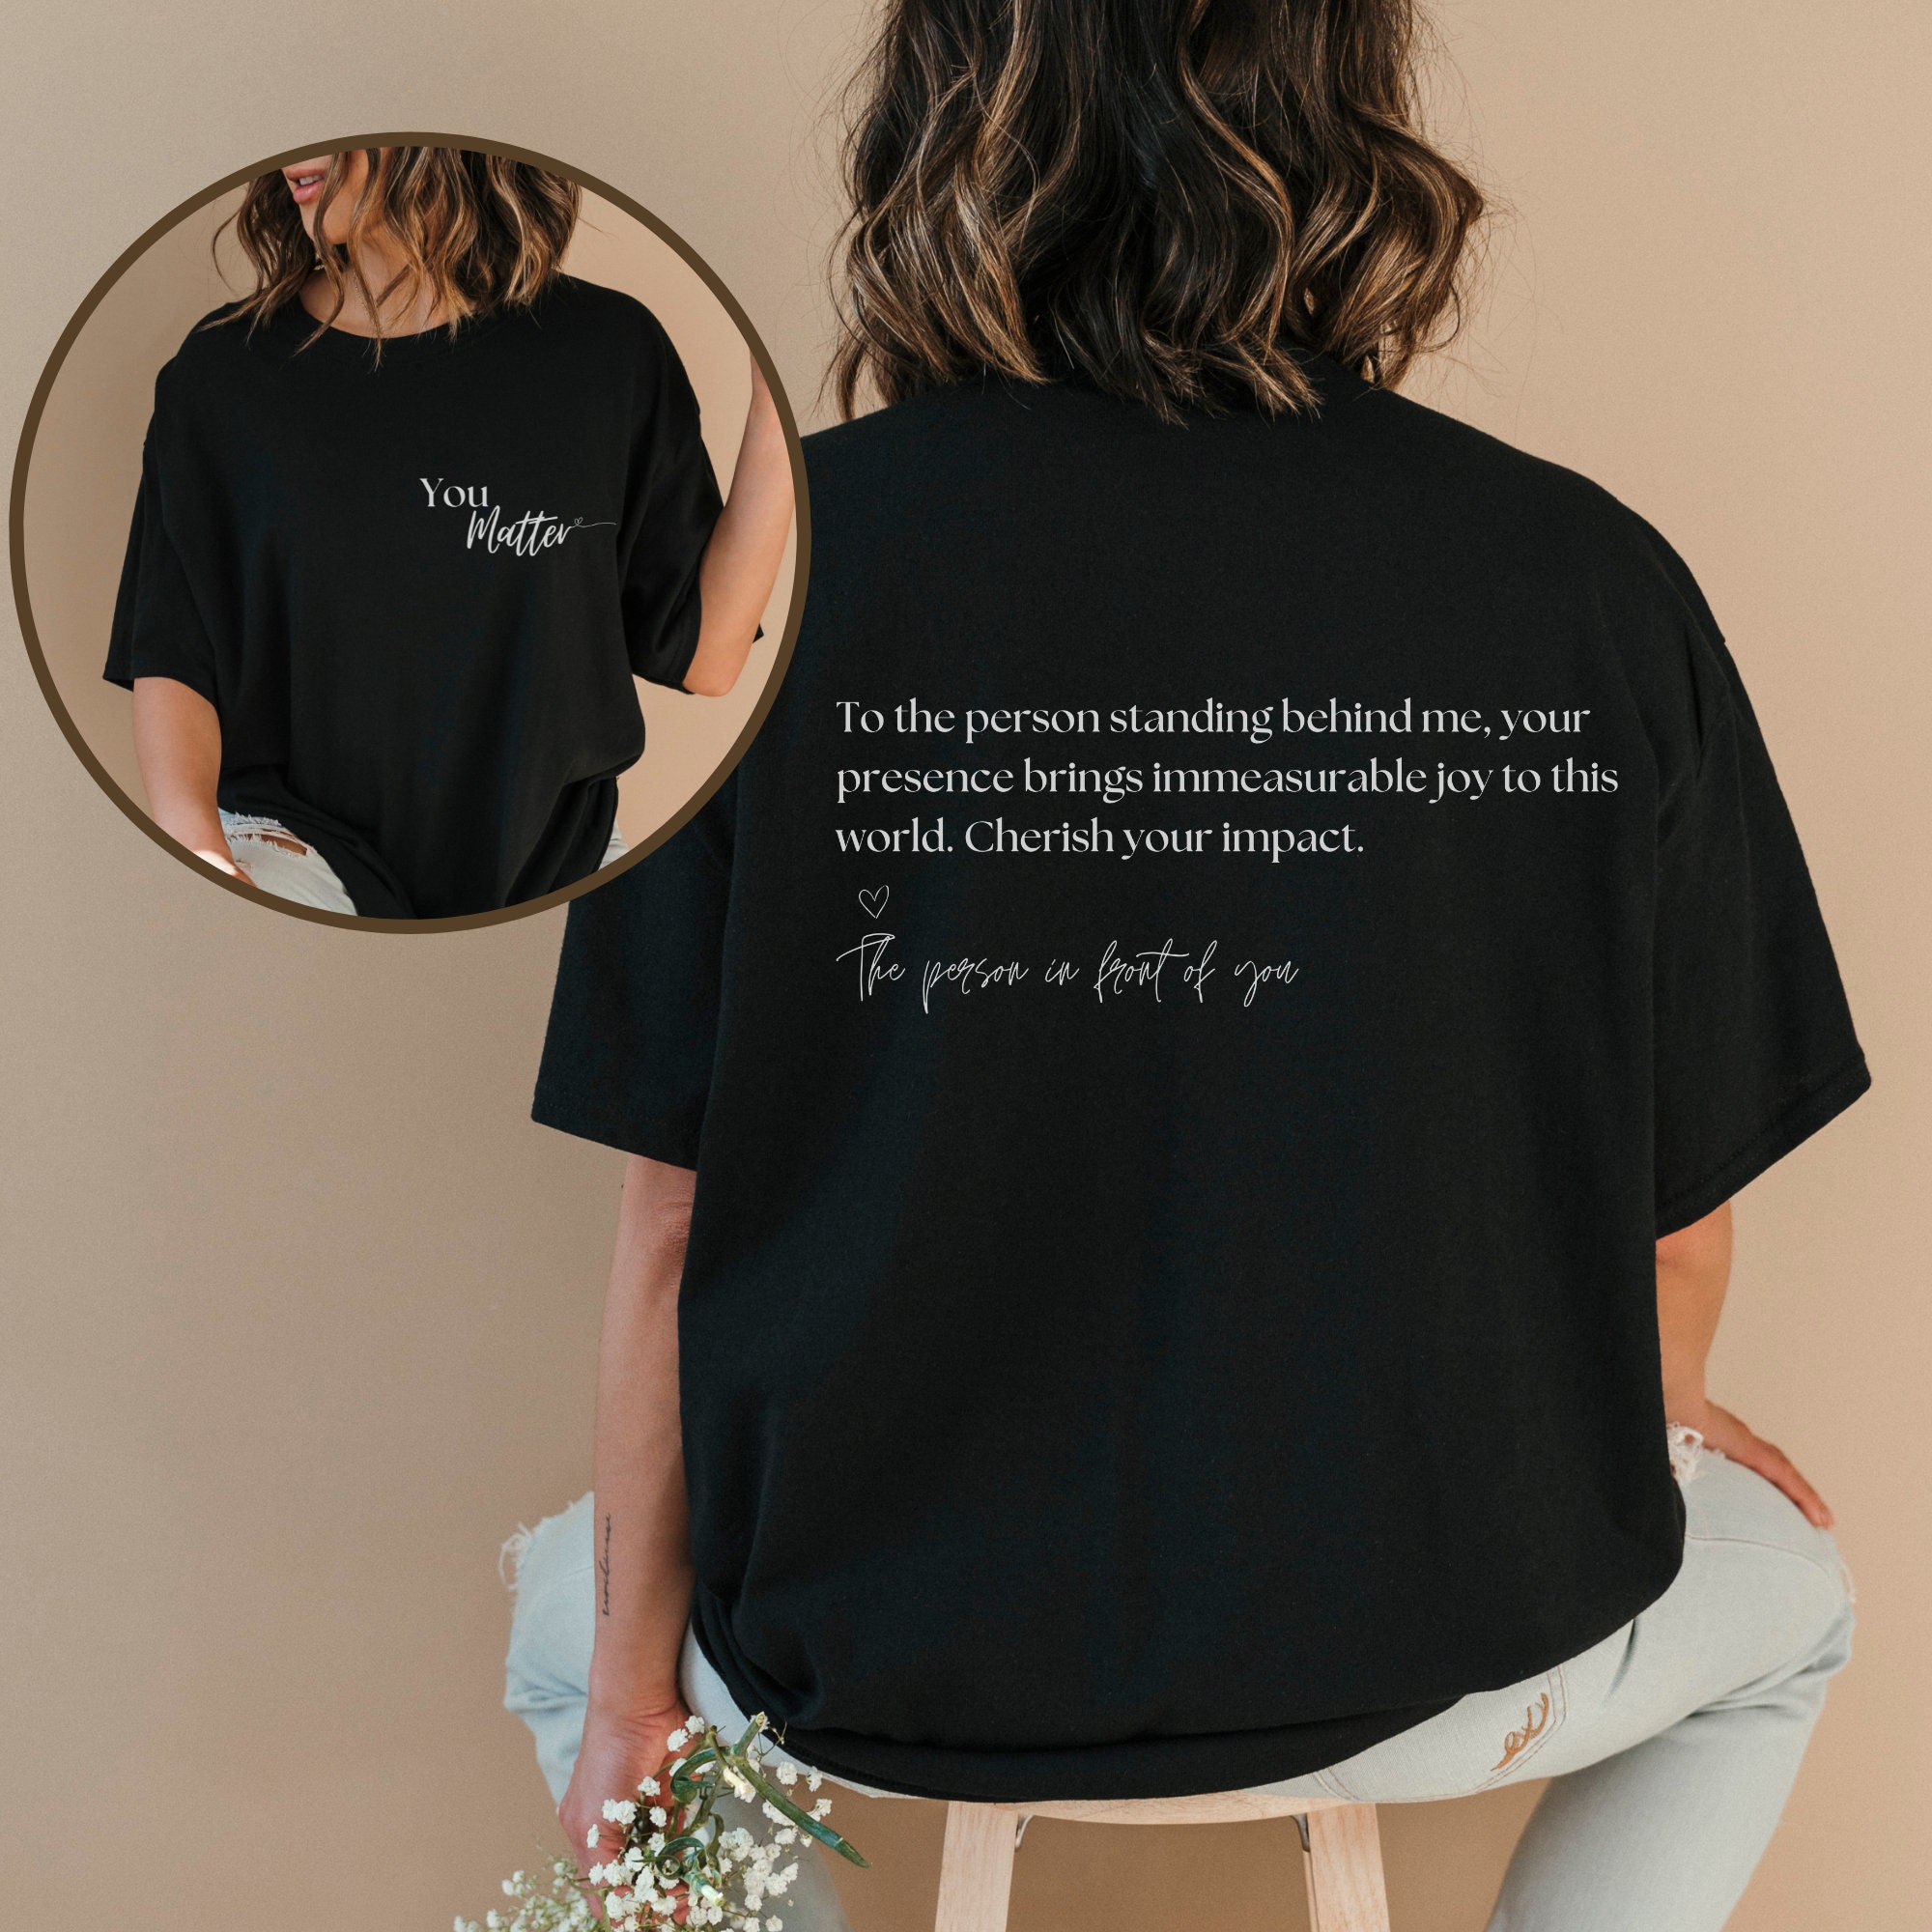 Discover To The Person Behind Me Shirt, You Matter Shirt, You Are Enough Shirt, Mental Health Matters Shirt, Kindness Shirt